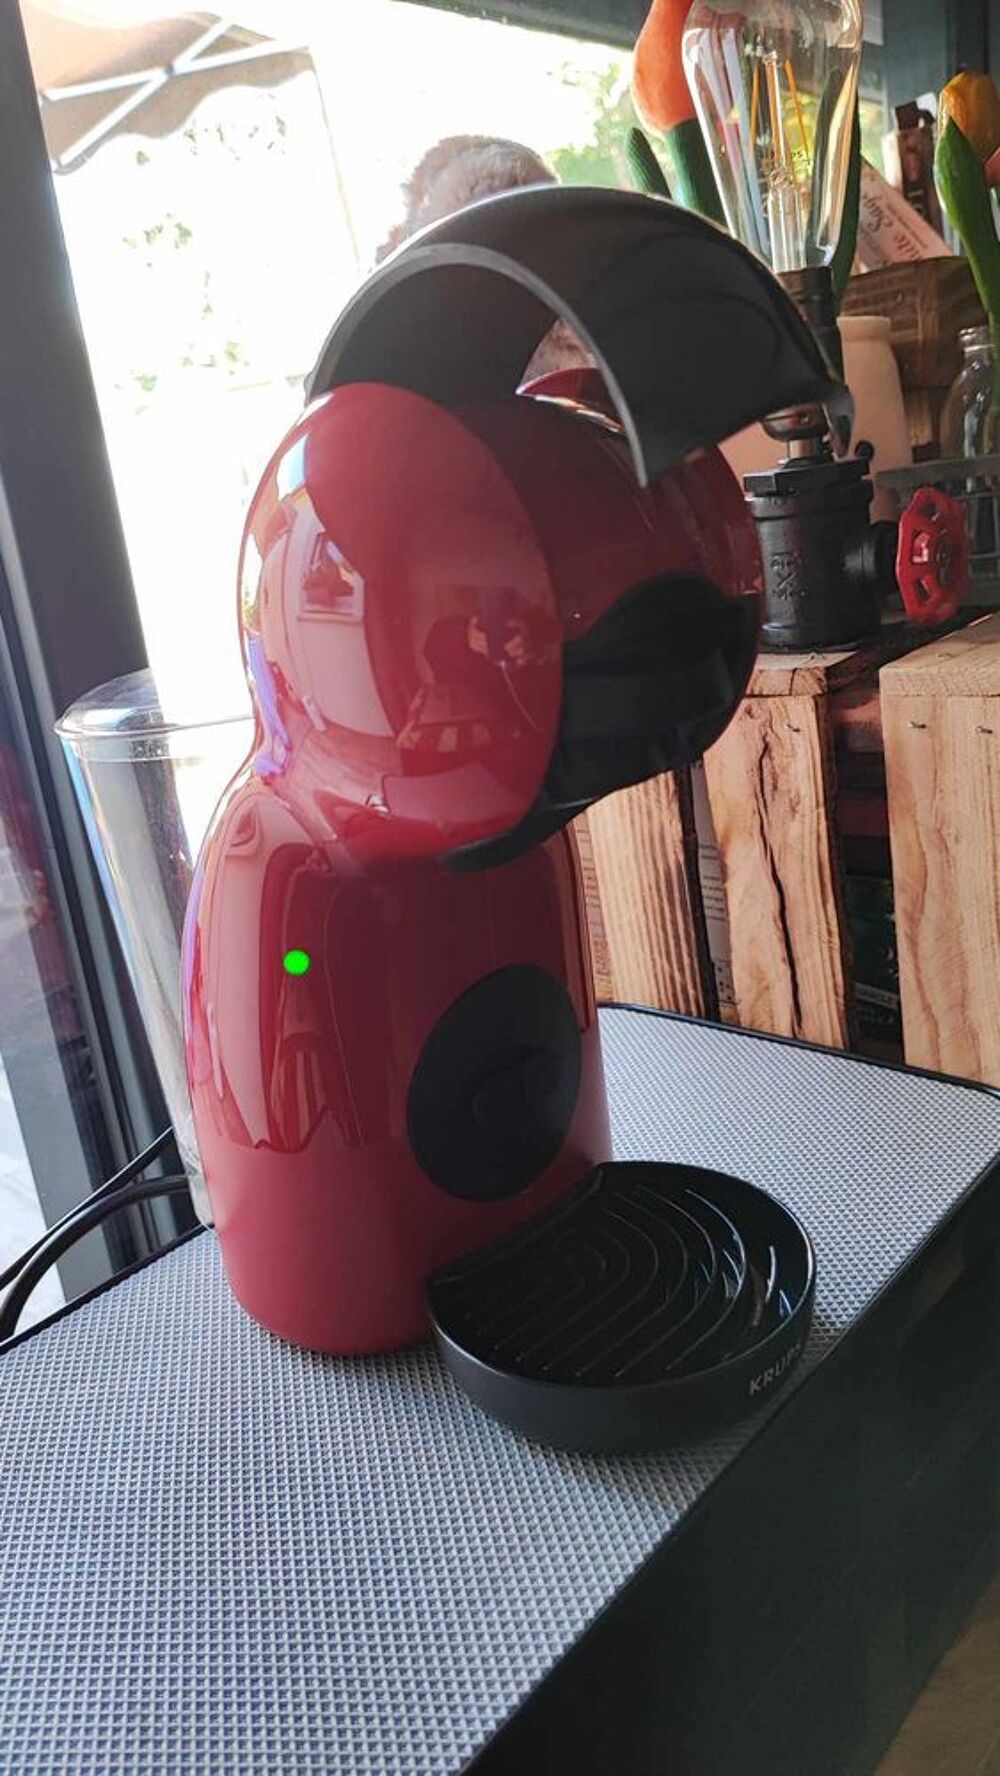 Cafetière Krups Piccolo XS Dolce Gusto Rouge